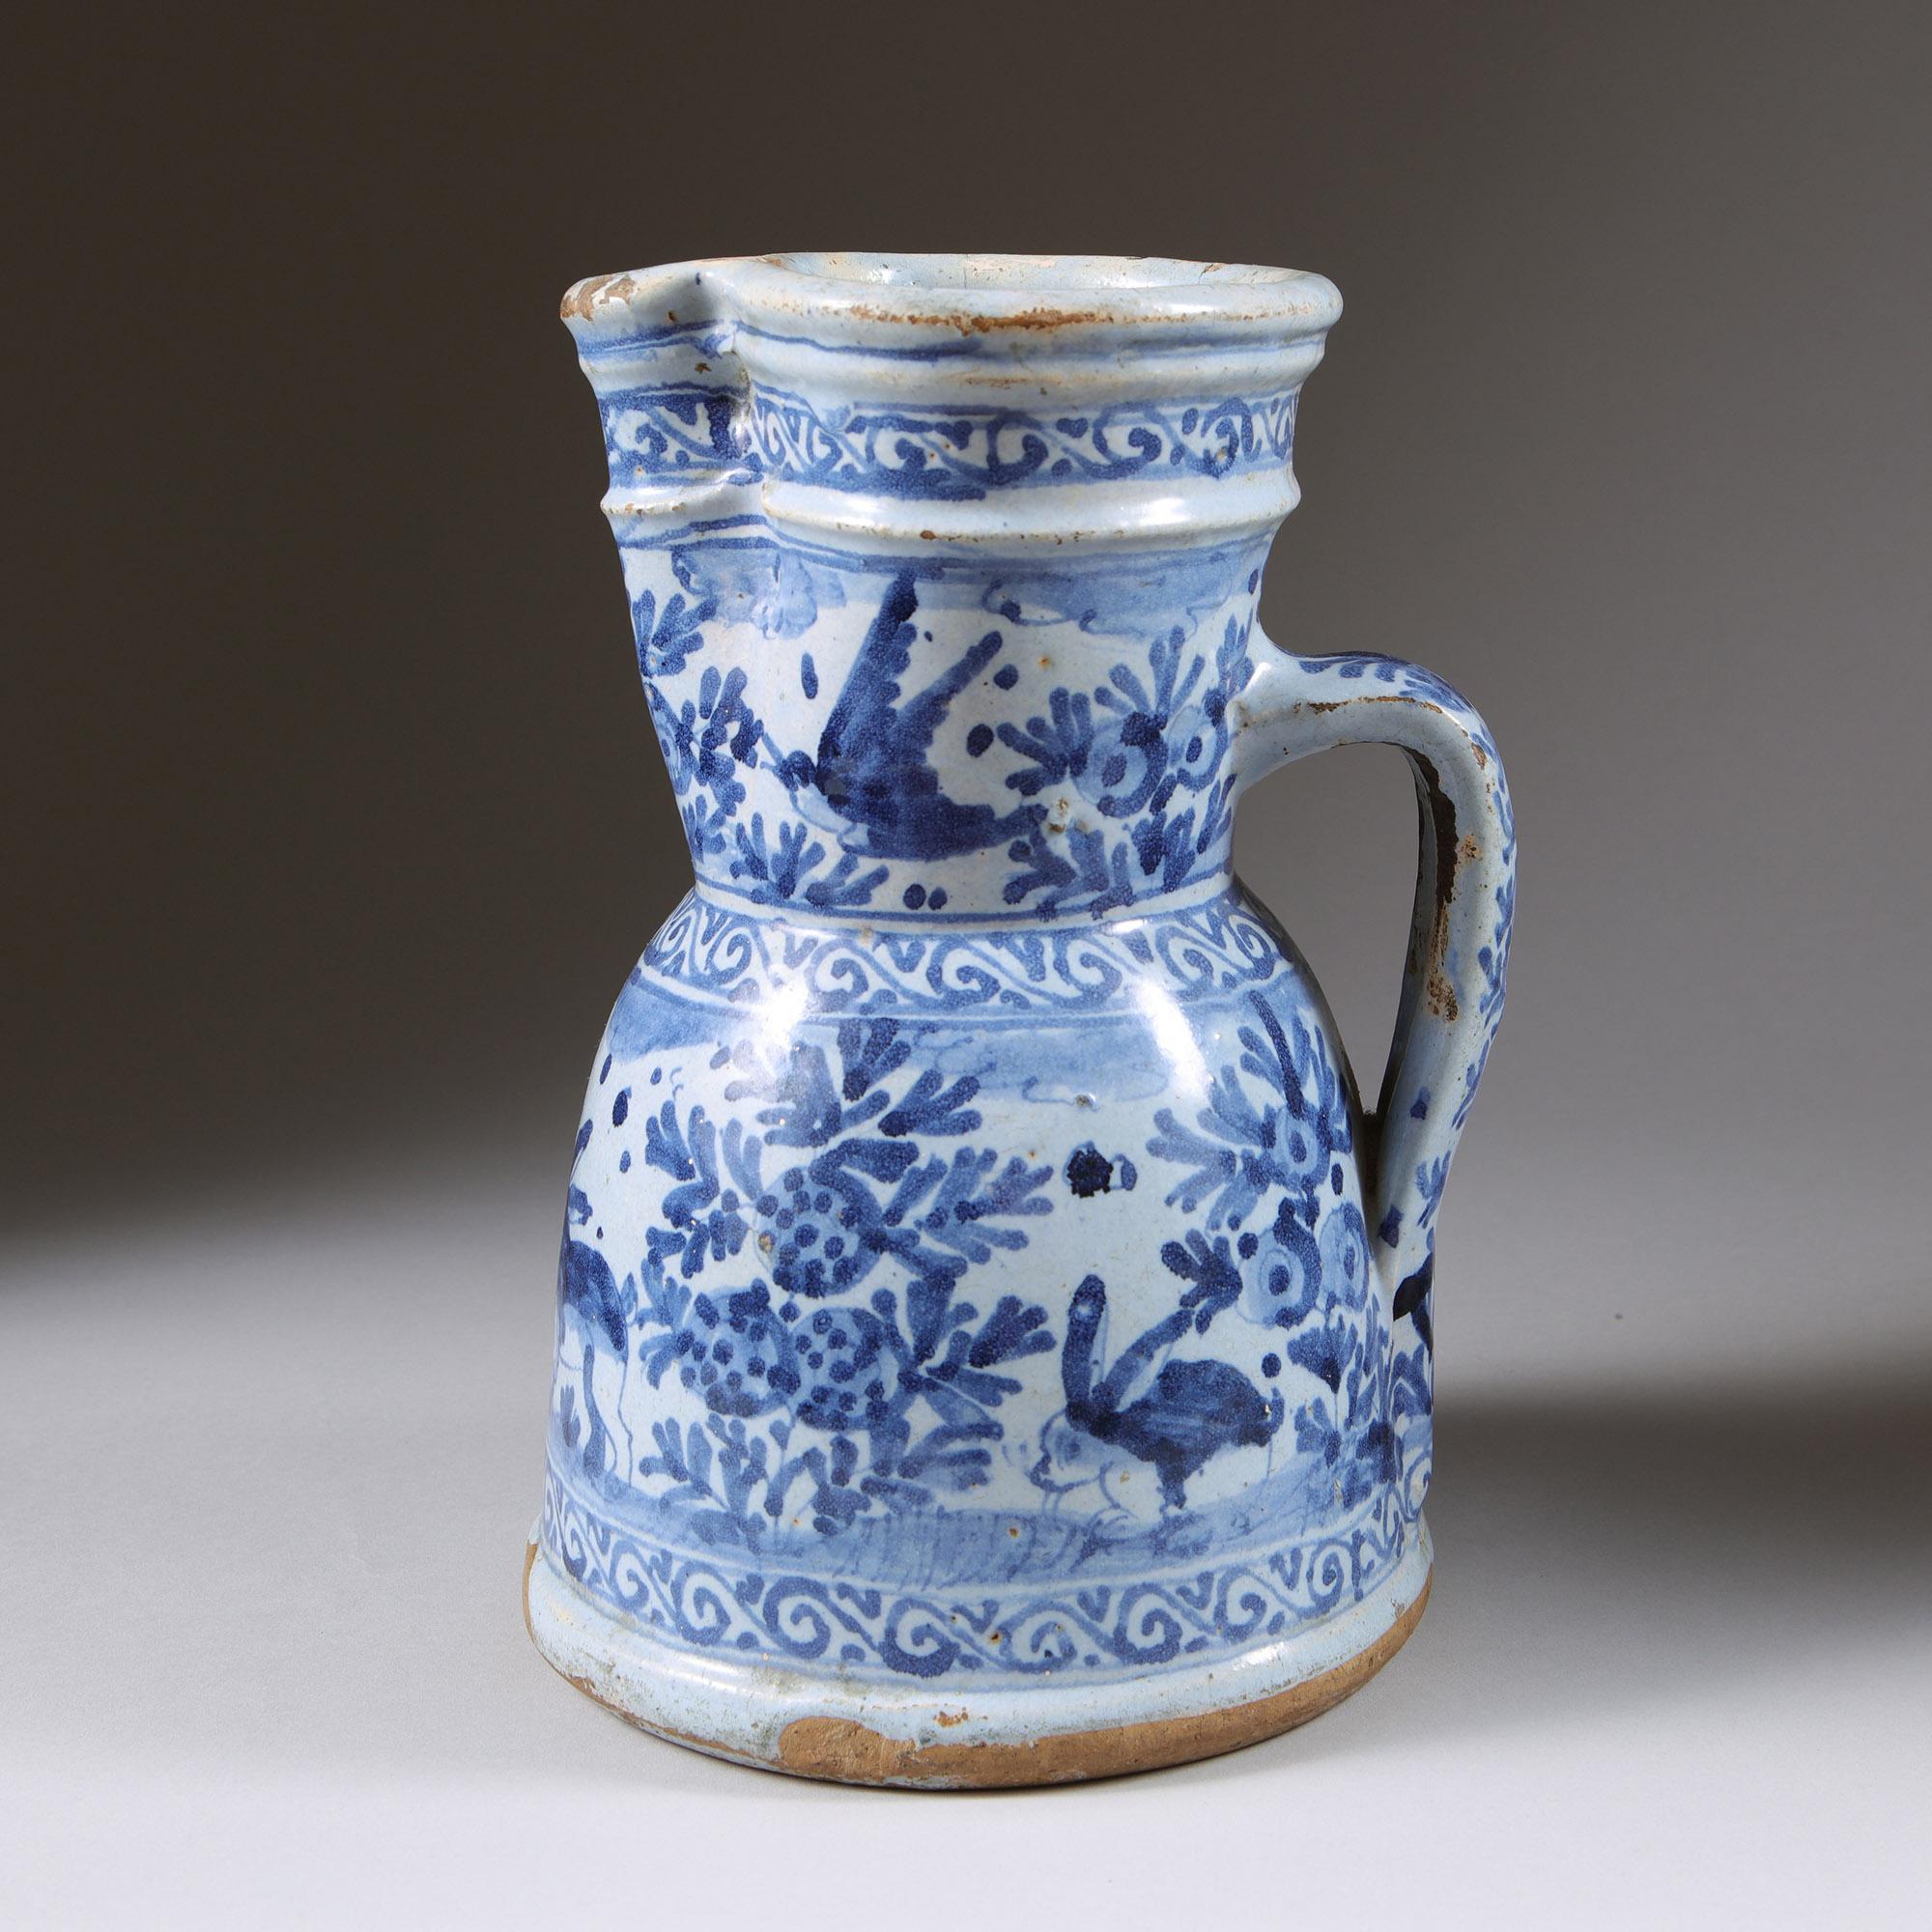 An unusual late 17th early 18th-Century Delft jug 4